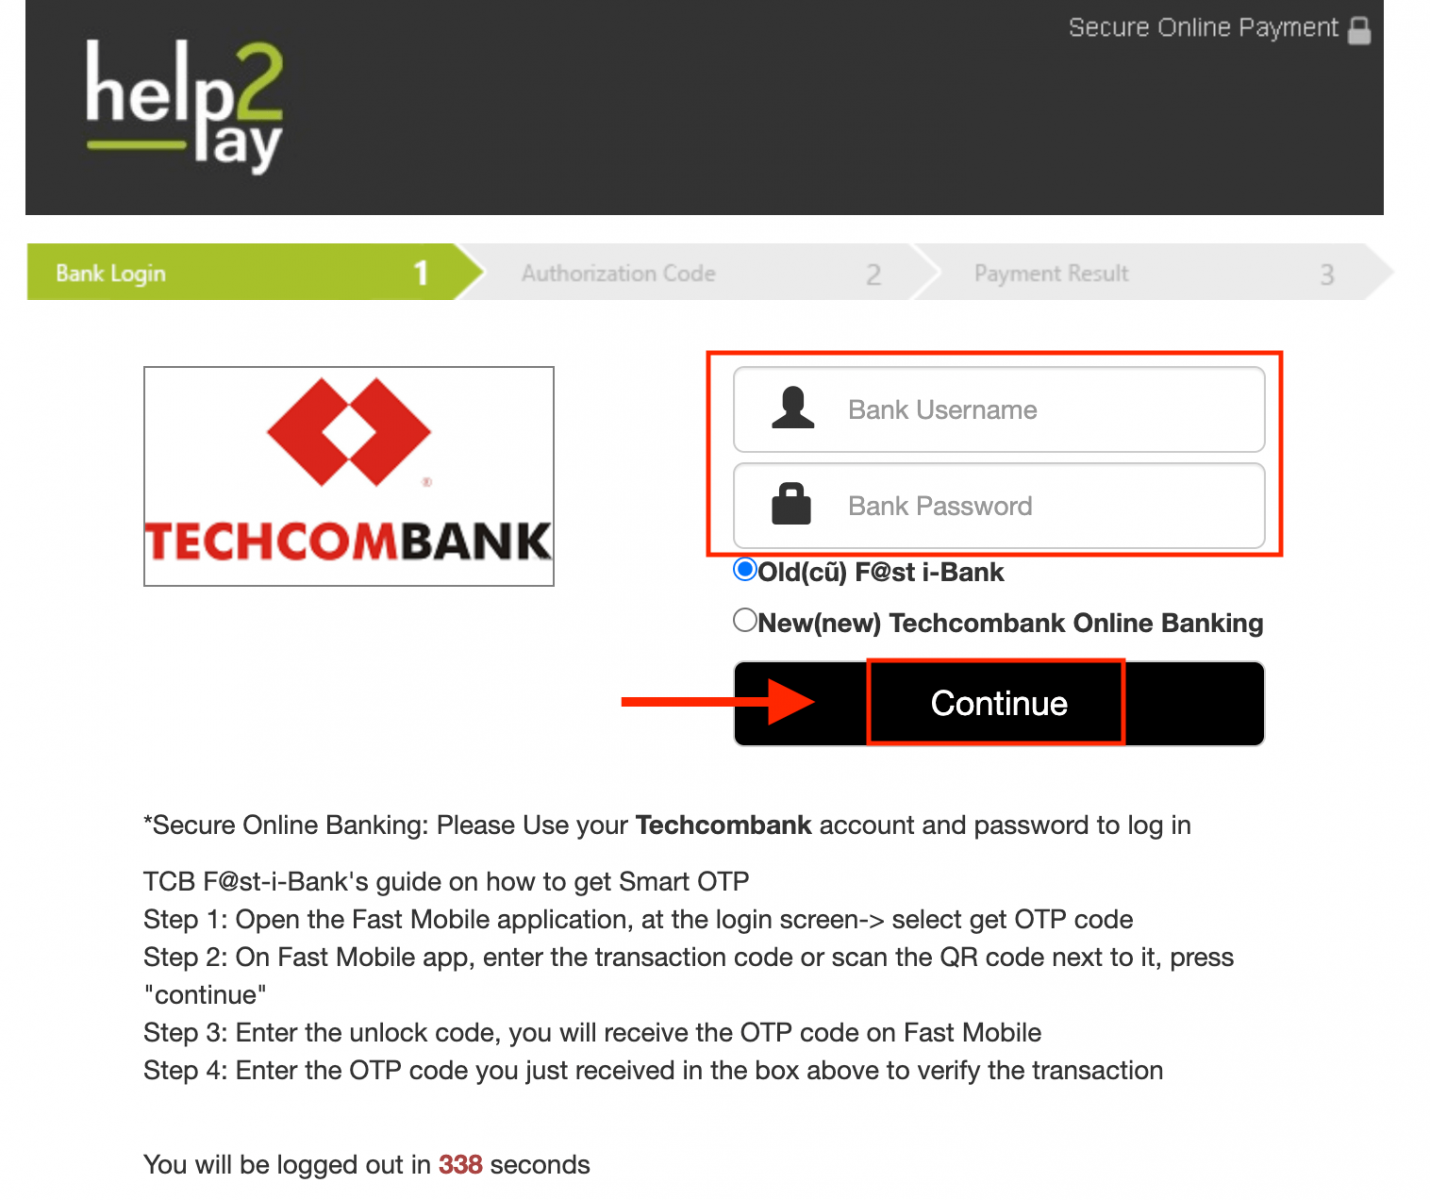 How to Deposit and Trade CFD instruments (Forex, Crypto, Stocks) at IQ Option